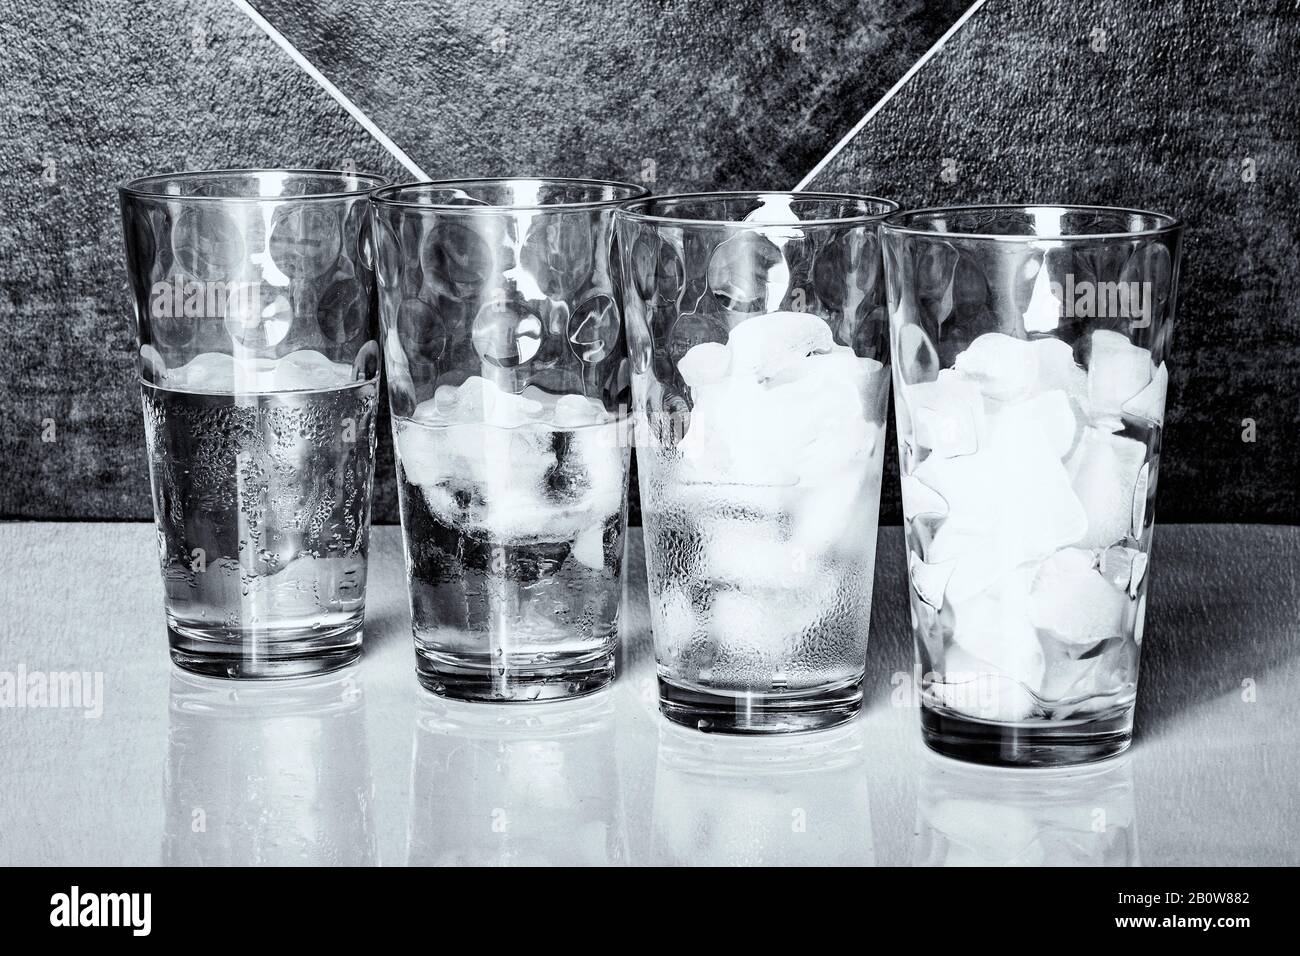 Monochrome view of four glasses of ice on a table top, each at a different stage of melting. Stock Photo